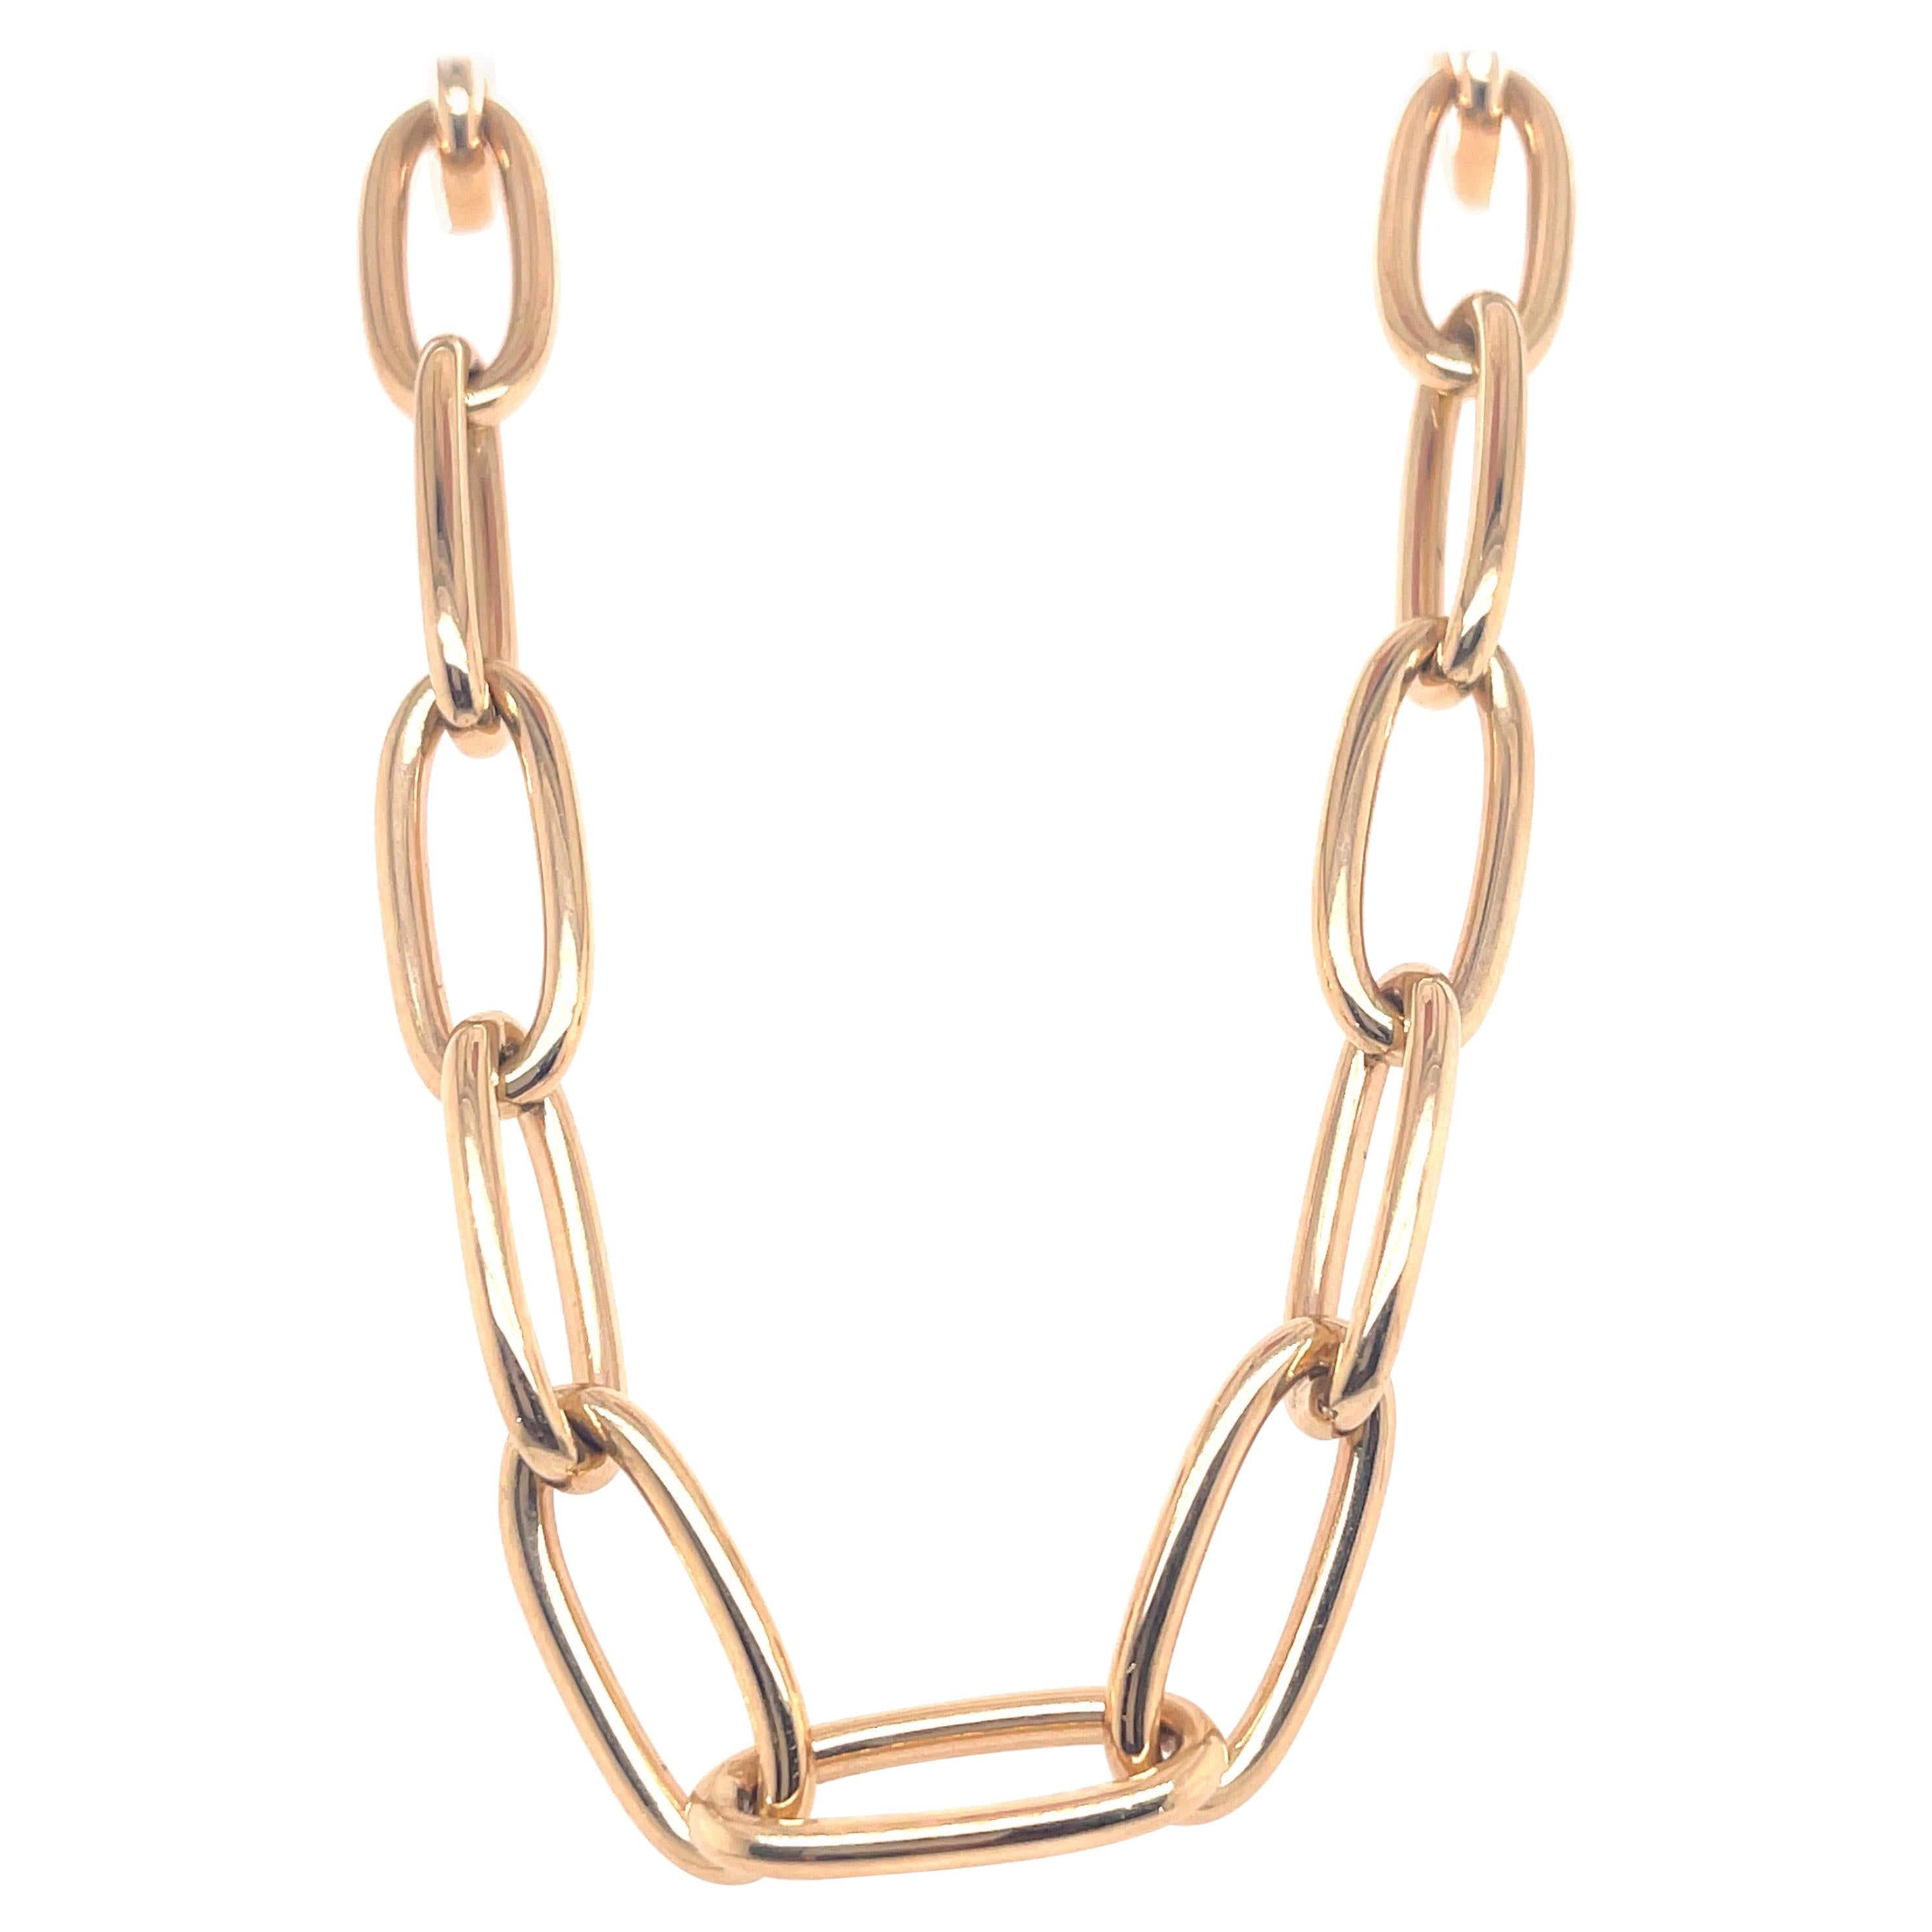 How do I wear a paperclip necklace?